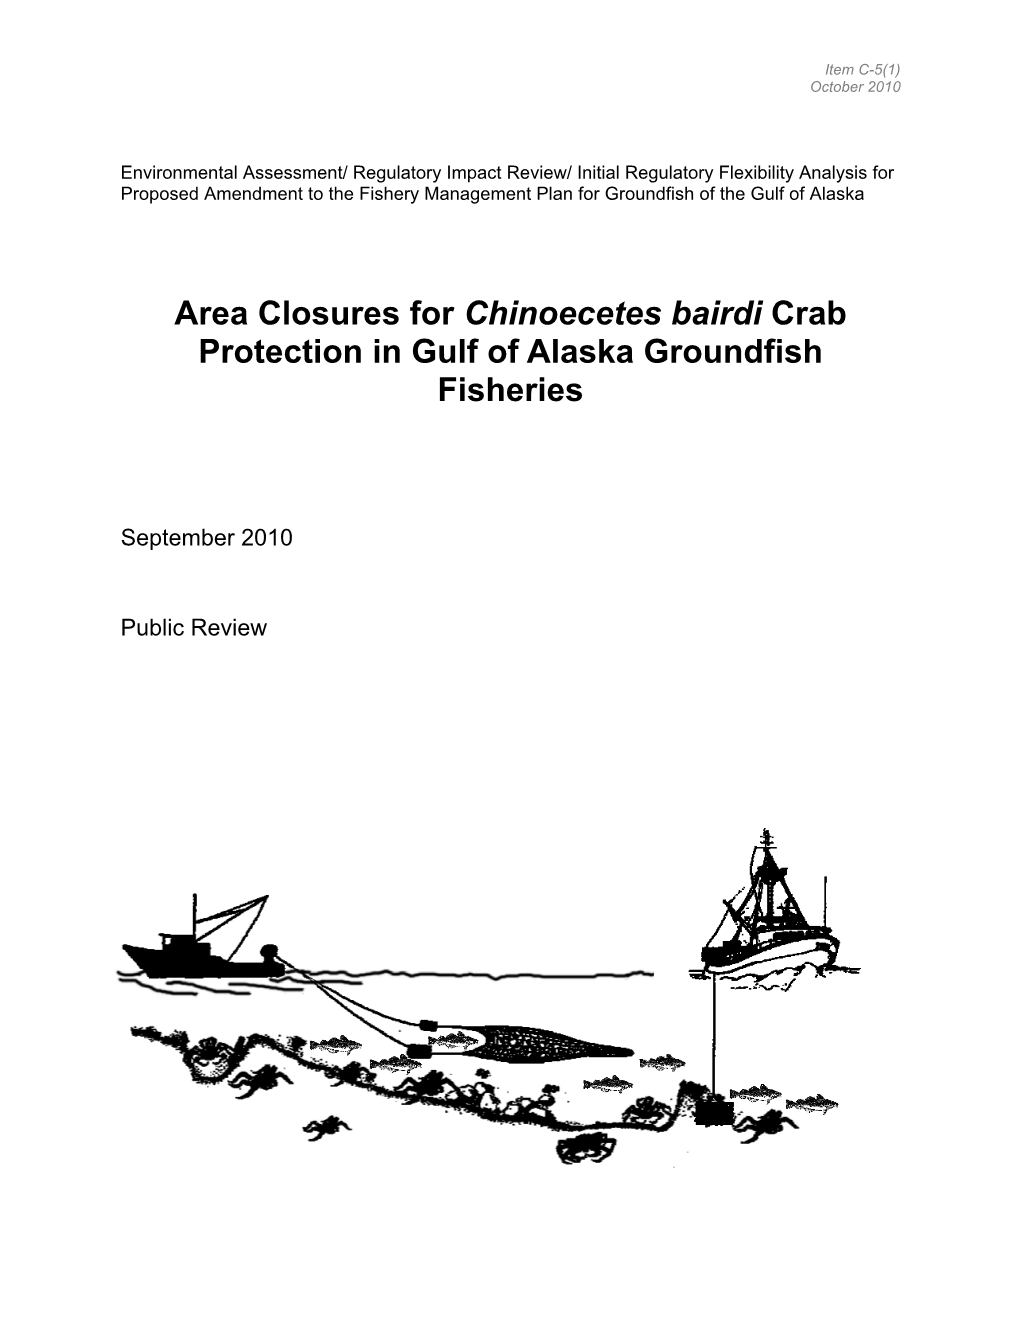 Area Closures for Chinoecetes Bairdi Crab Protection in Gulf of Alaska Groundfish Fisheries